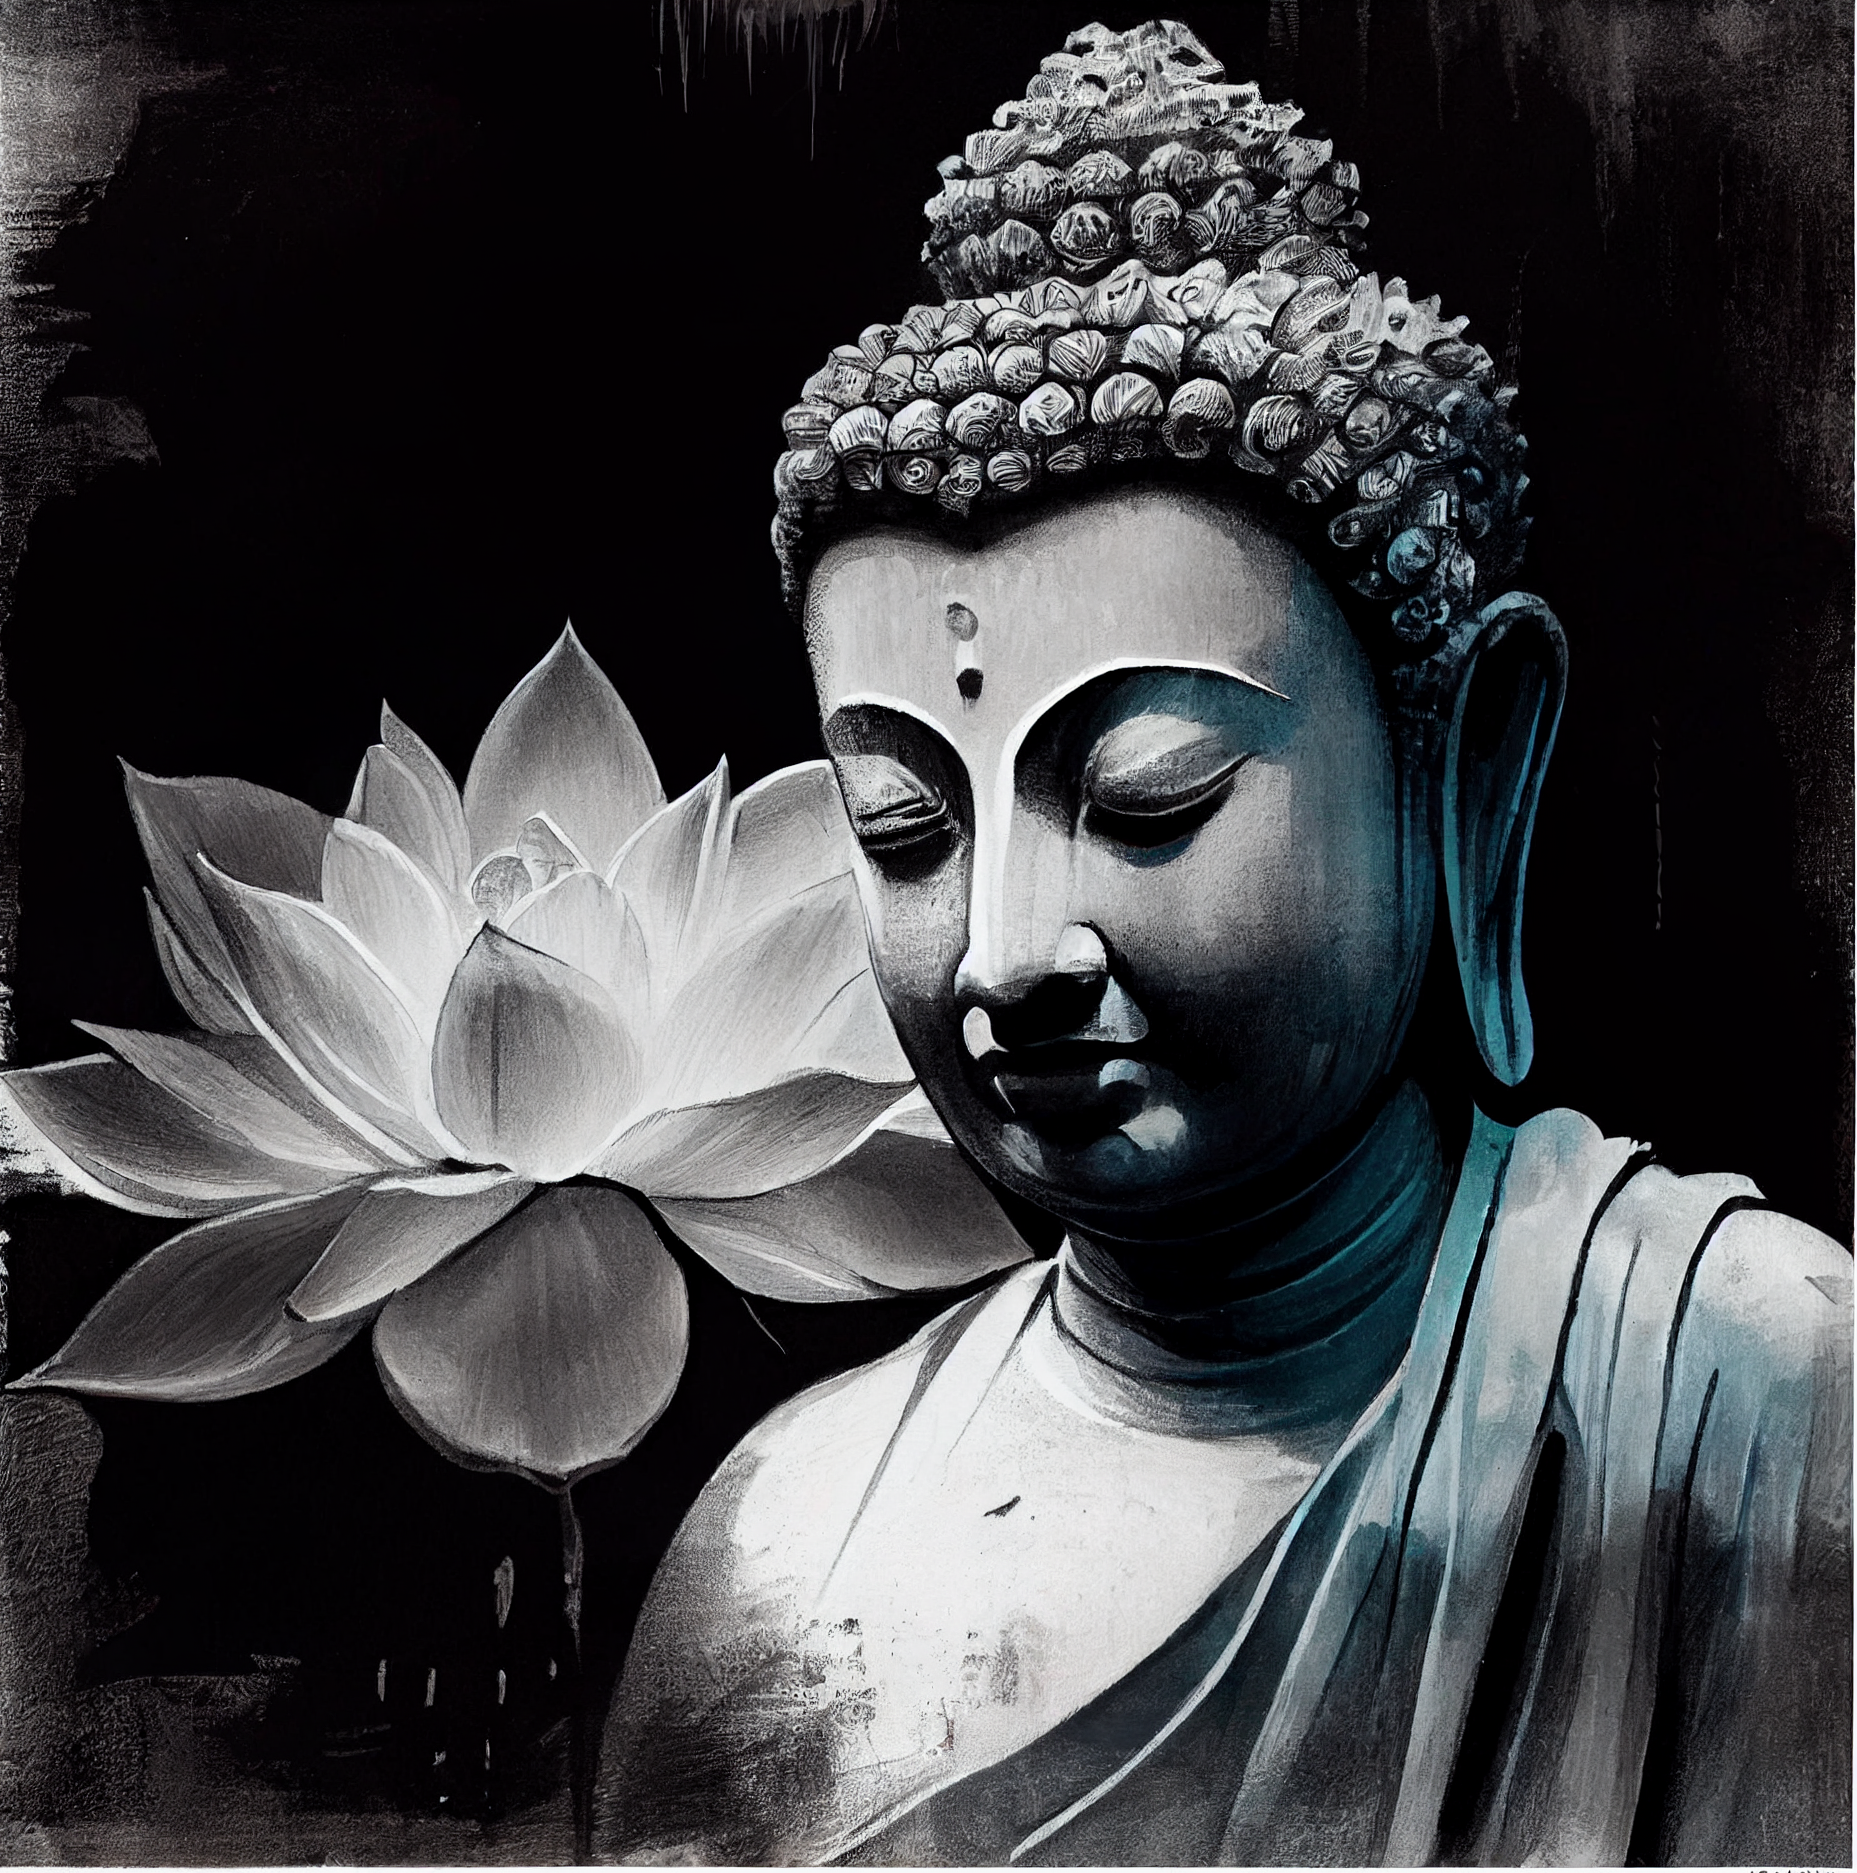 Transcendent Serenity: A Contemporary Charcoal Portrait Print of Buddha with a White Lotus and Blue Accents